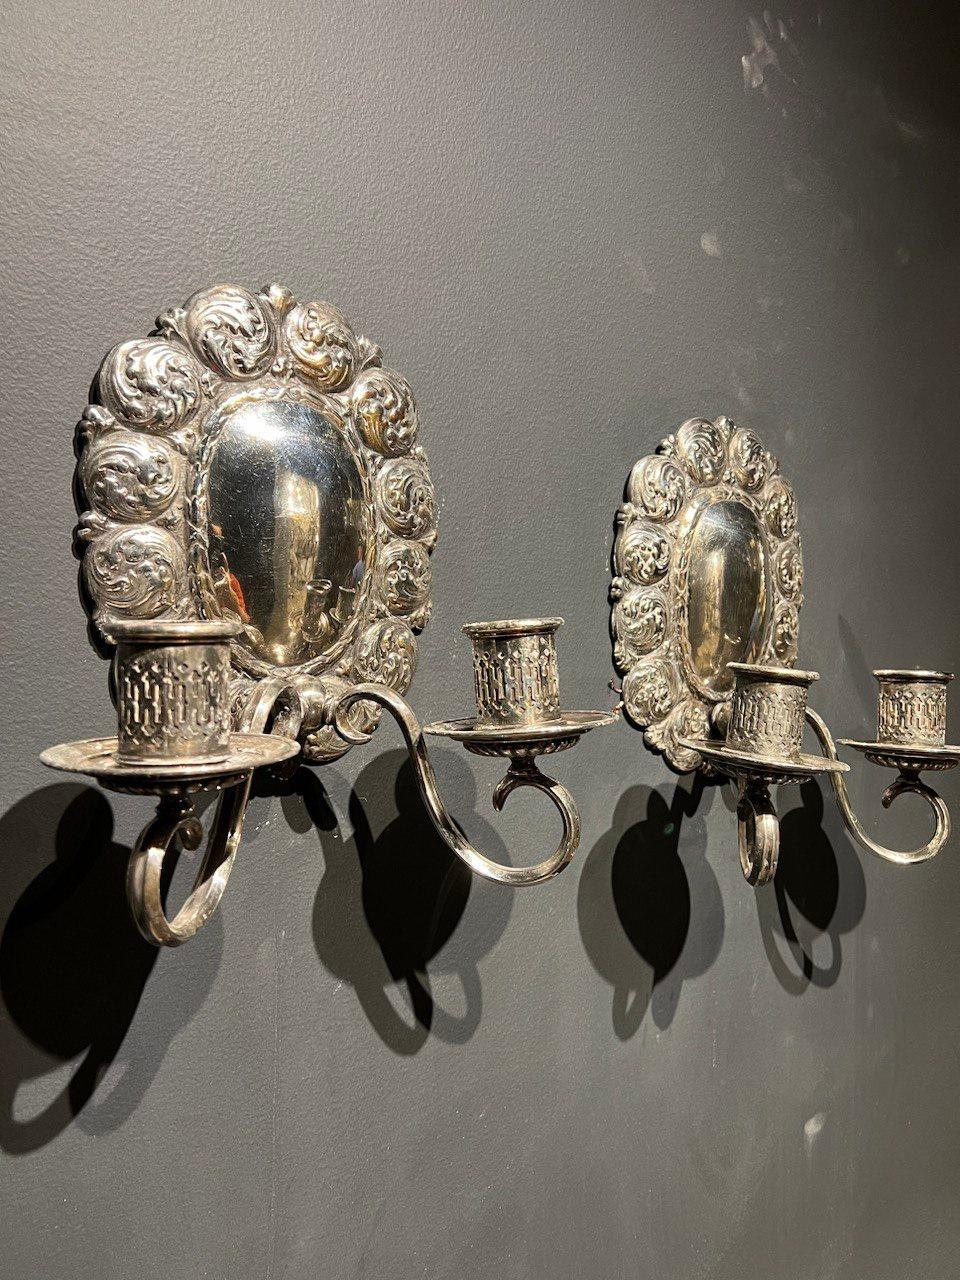 A circa 1920's Caldwell silver plated sconces with wave design and two lights